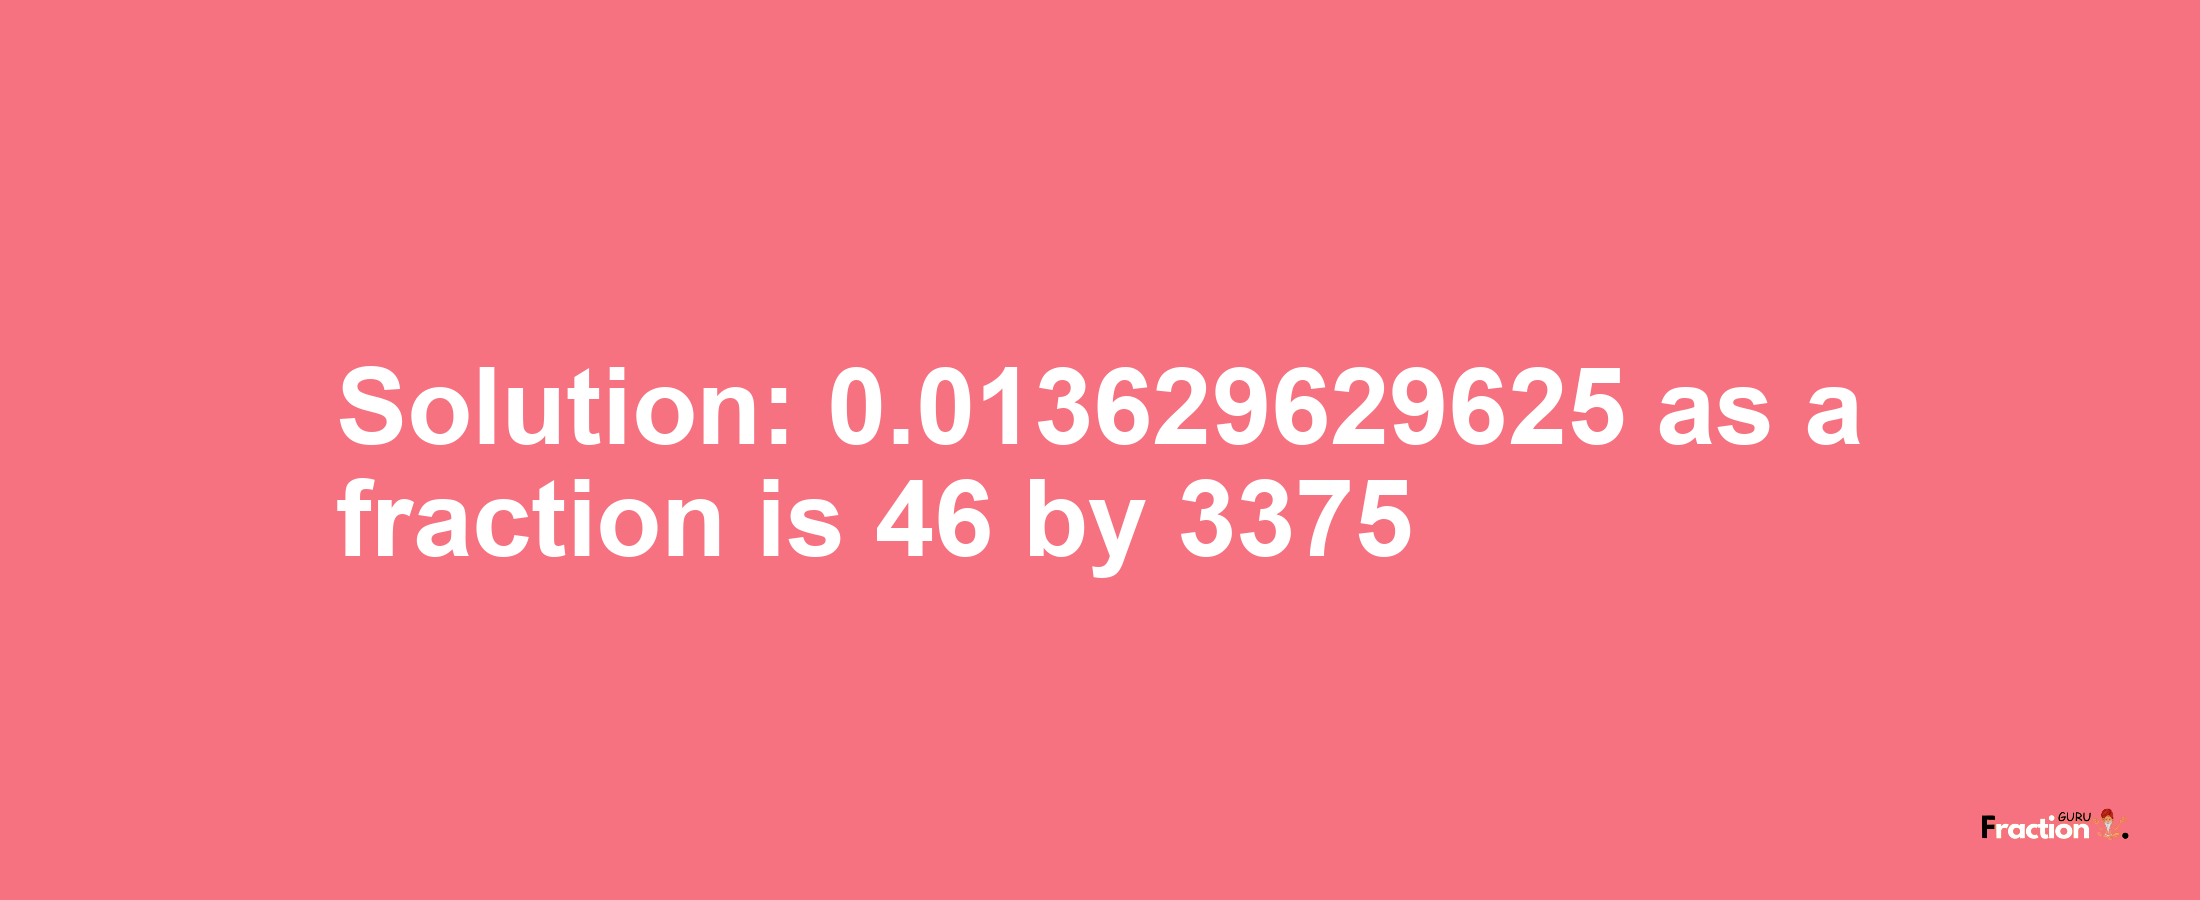 Solution:0.013629629625 as a fraction is 46/3375